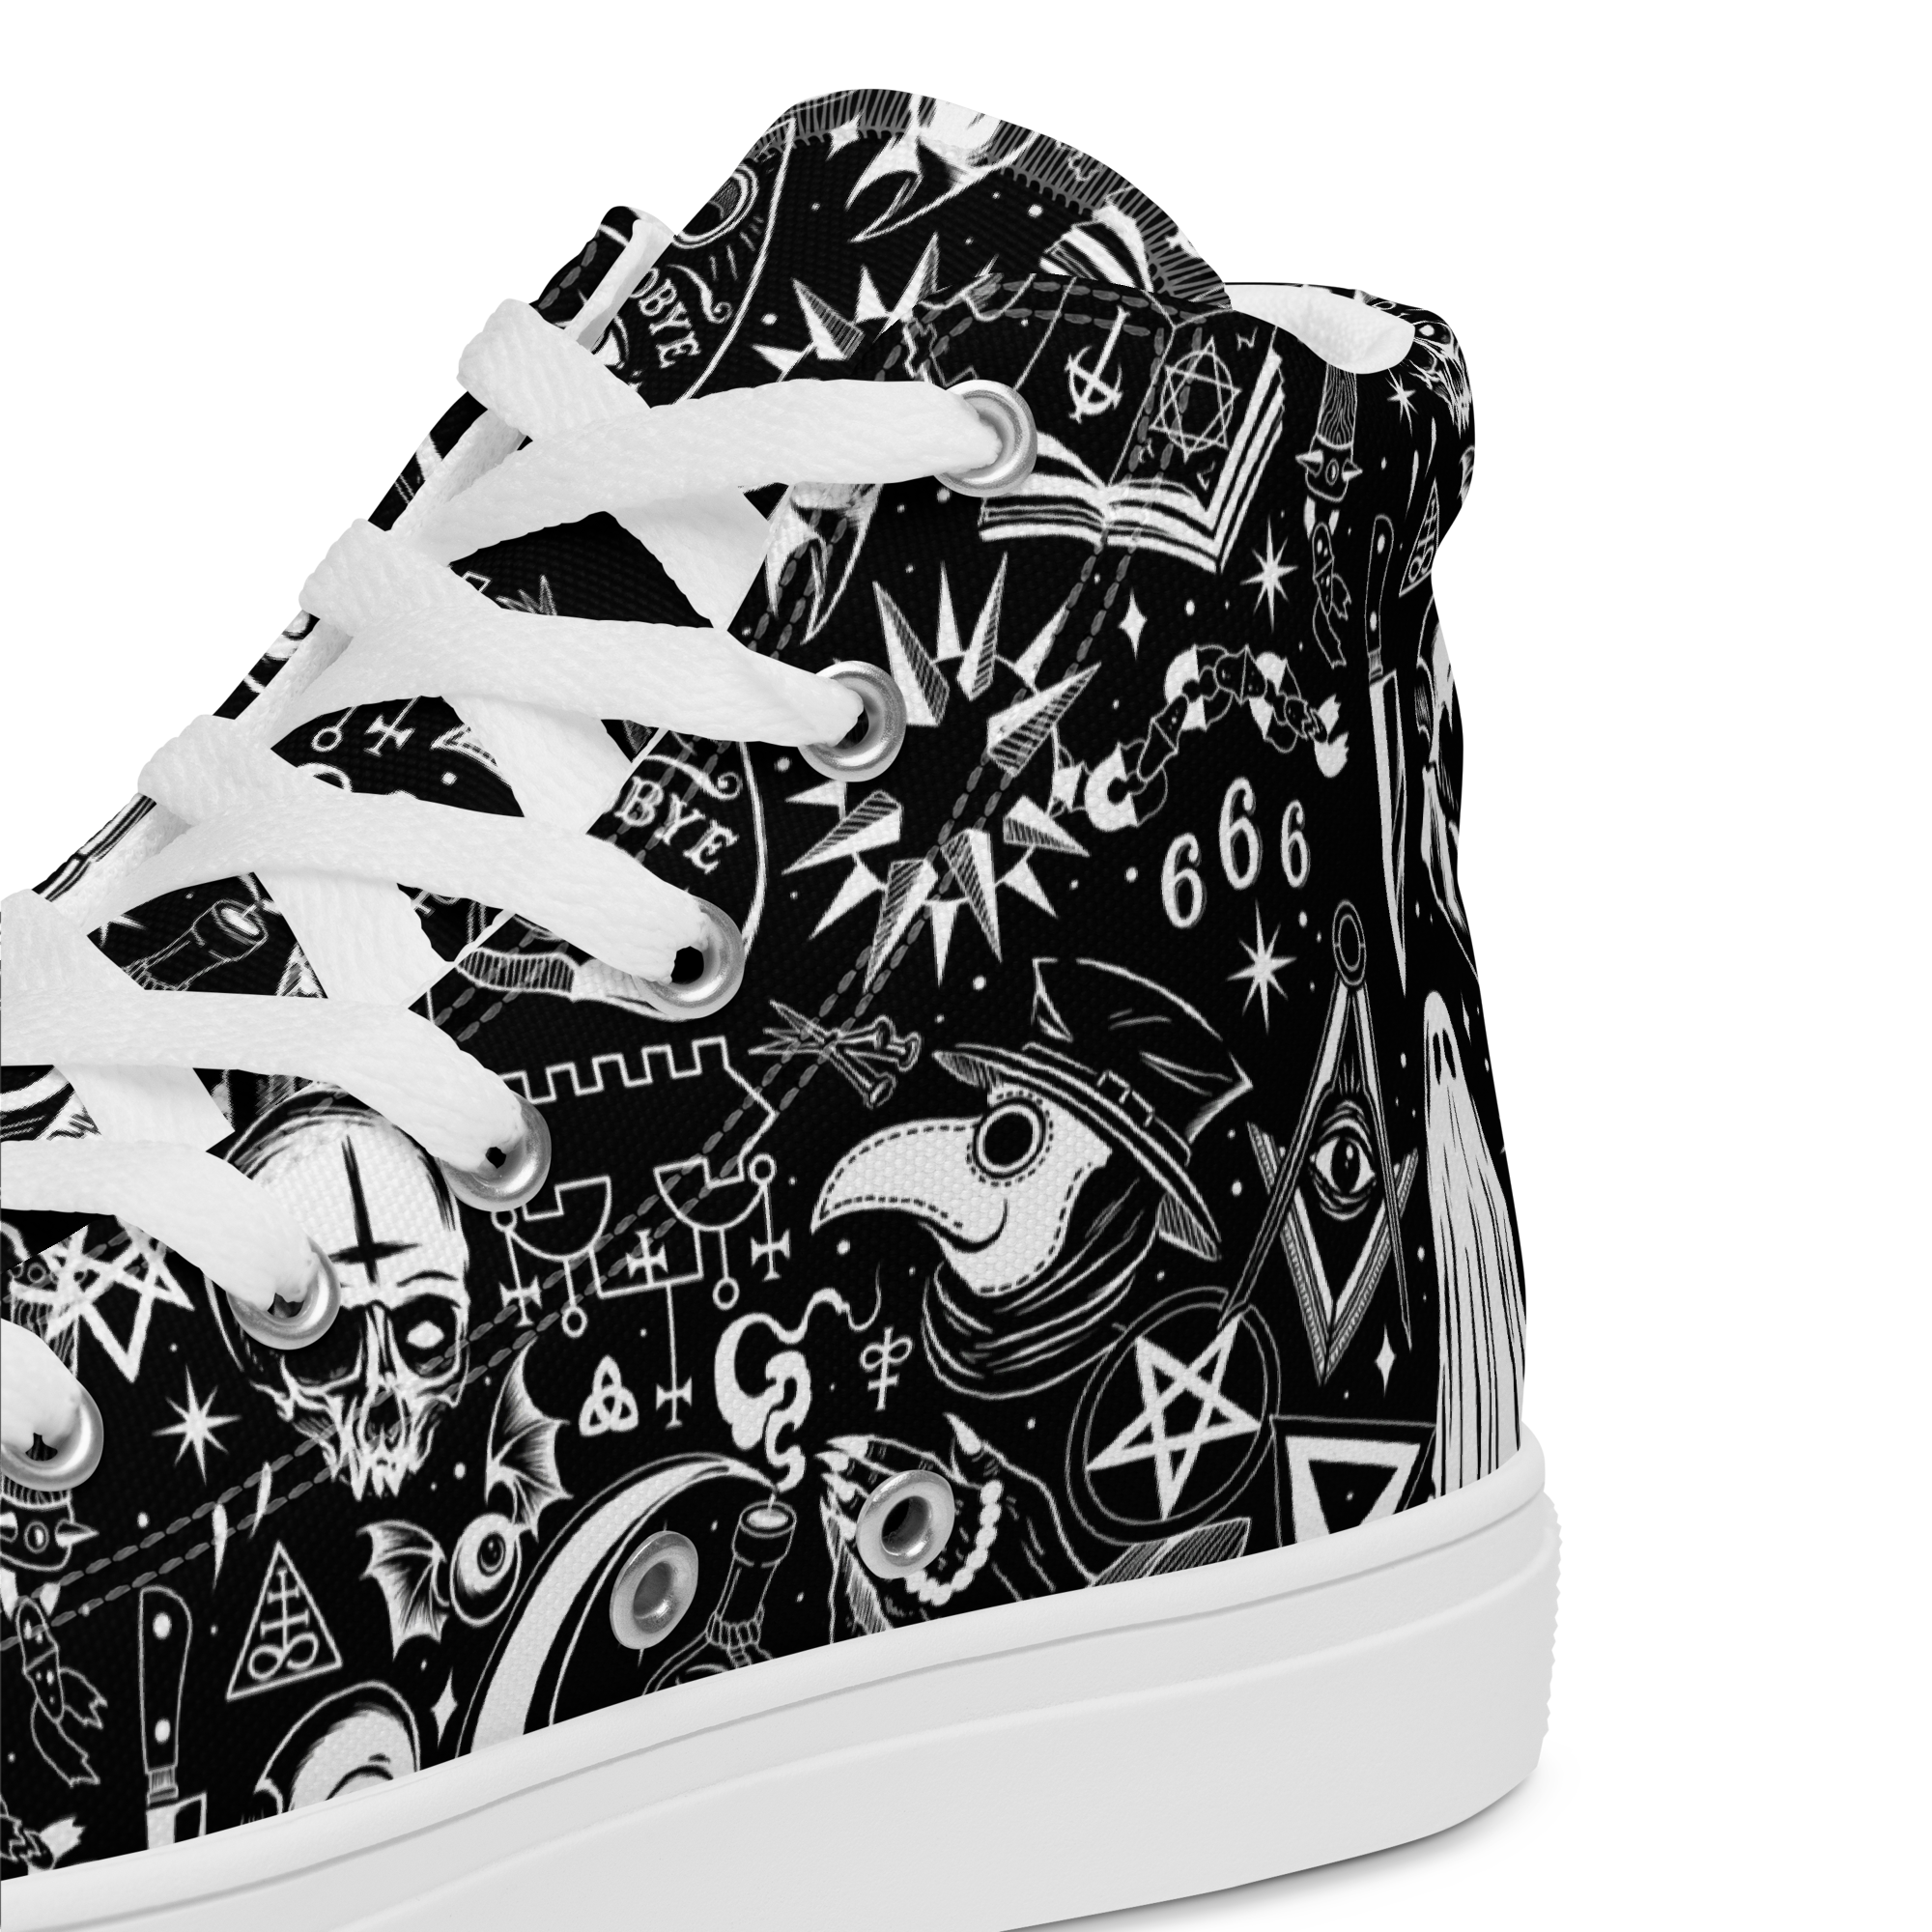 The Satanist high top canvas shoes